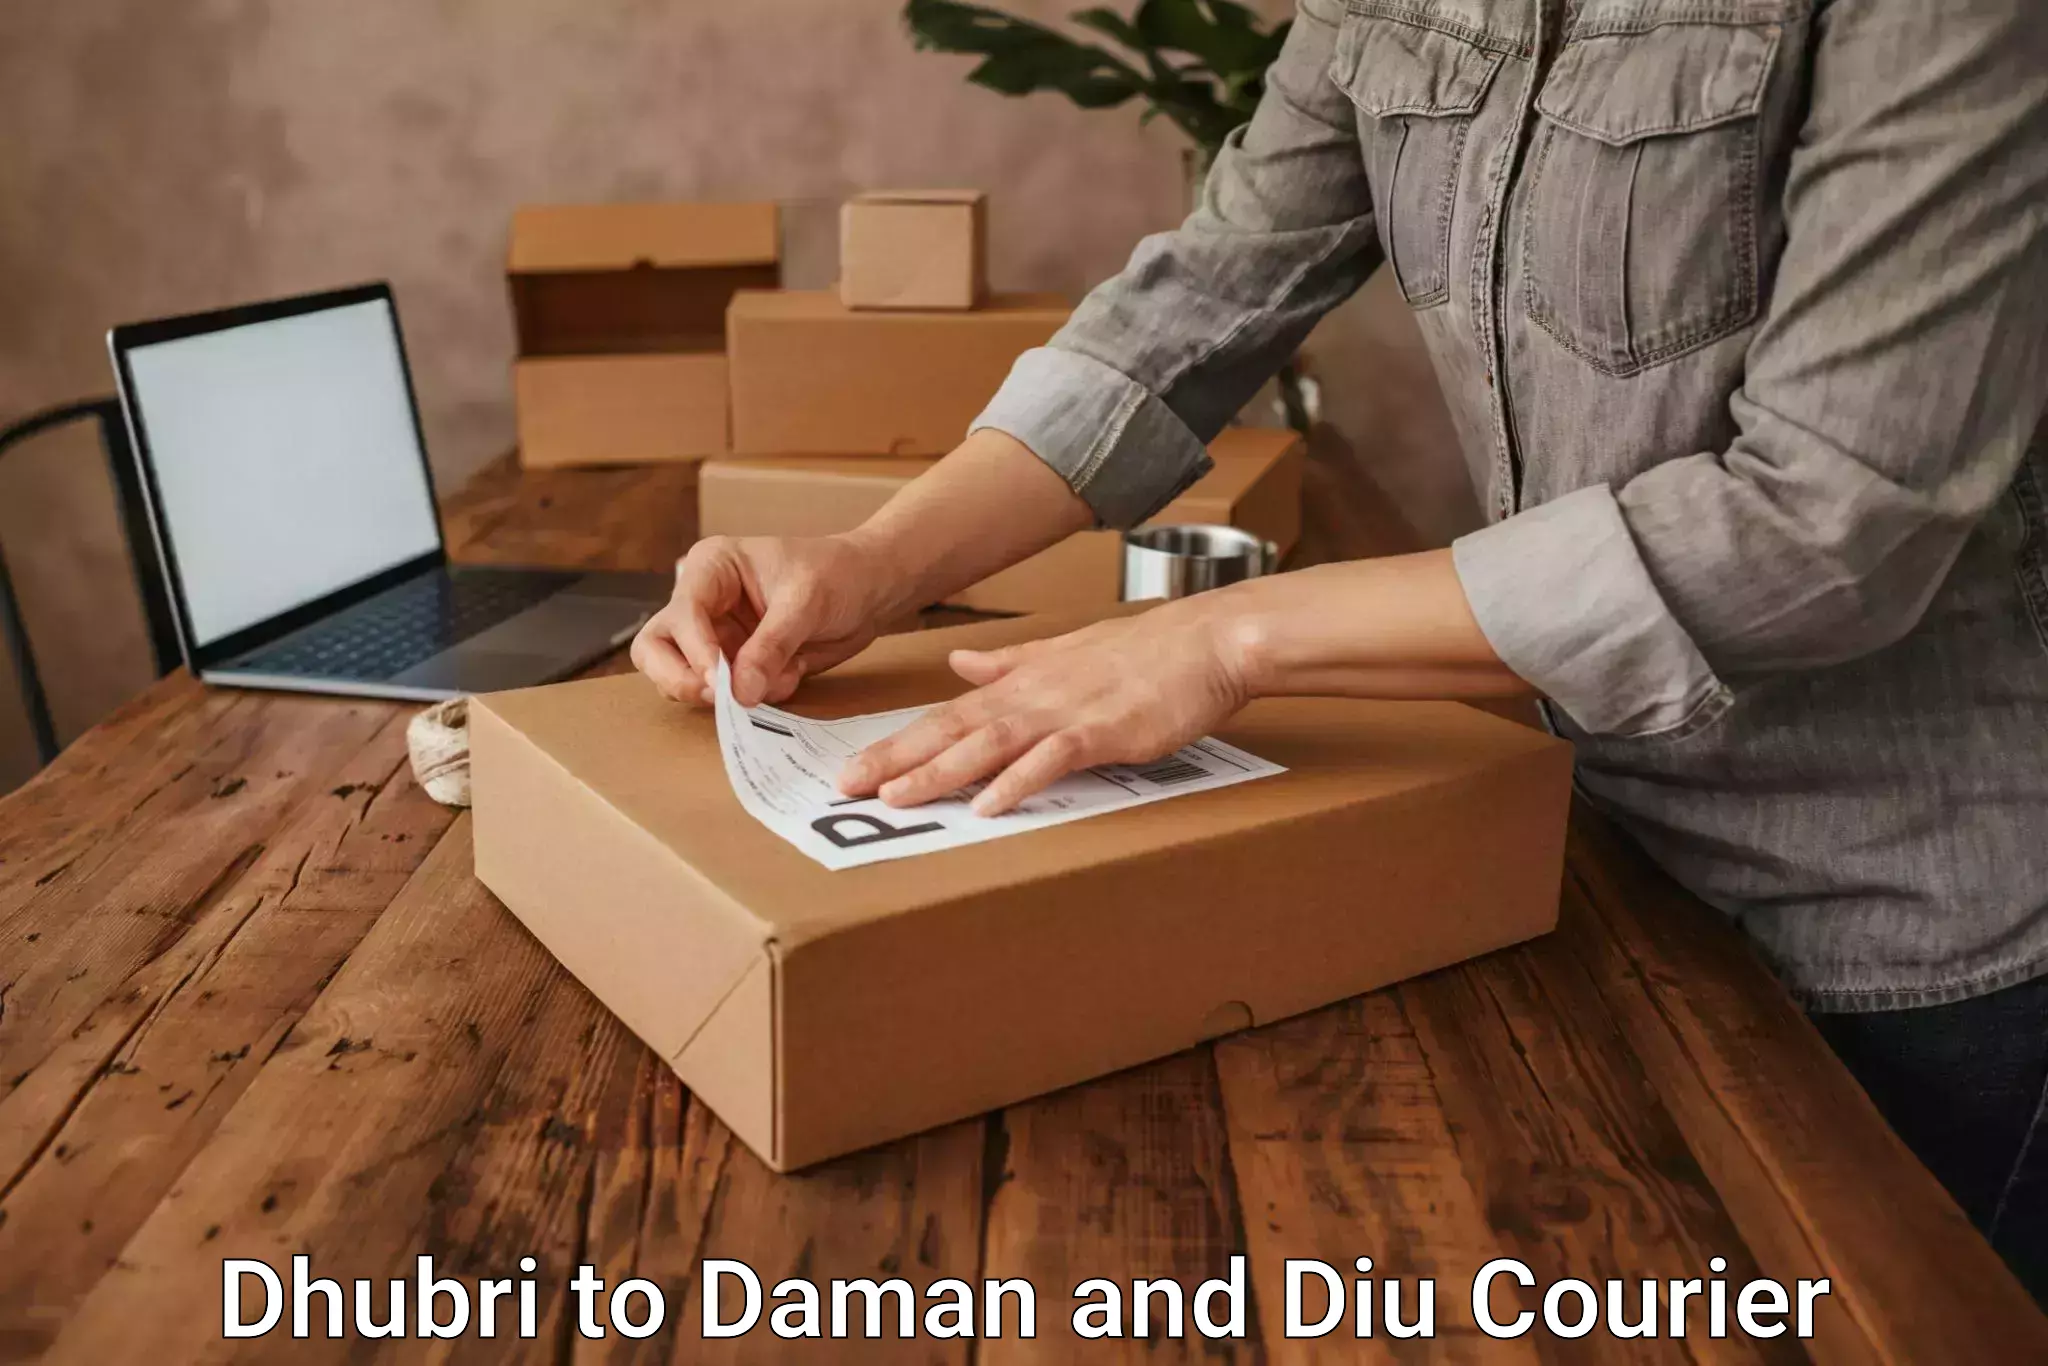 Nationwide parcel services Dhubri to Daman and Diu